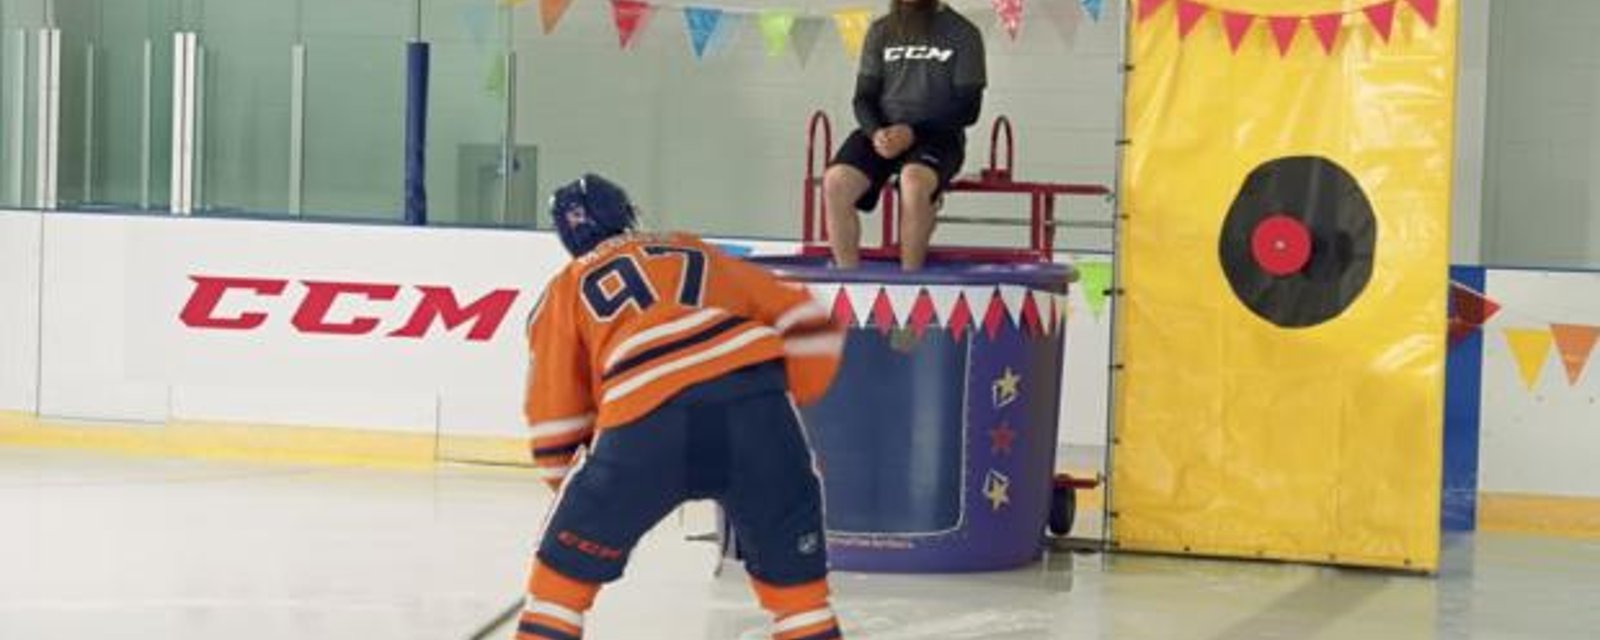 Must see: McDavid and Burns go head-to-head in plate-smashing and dunk-tanking shot contests!